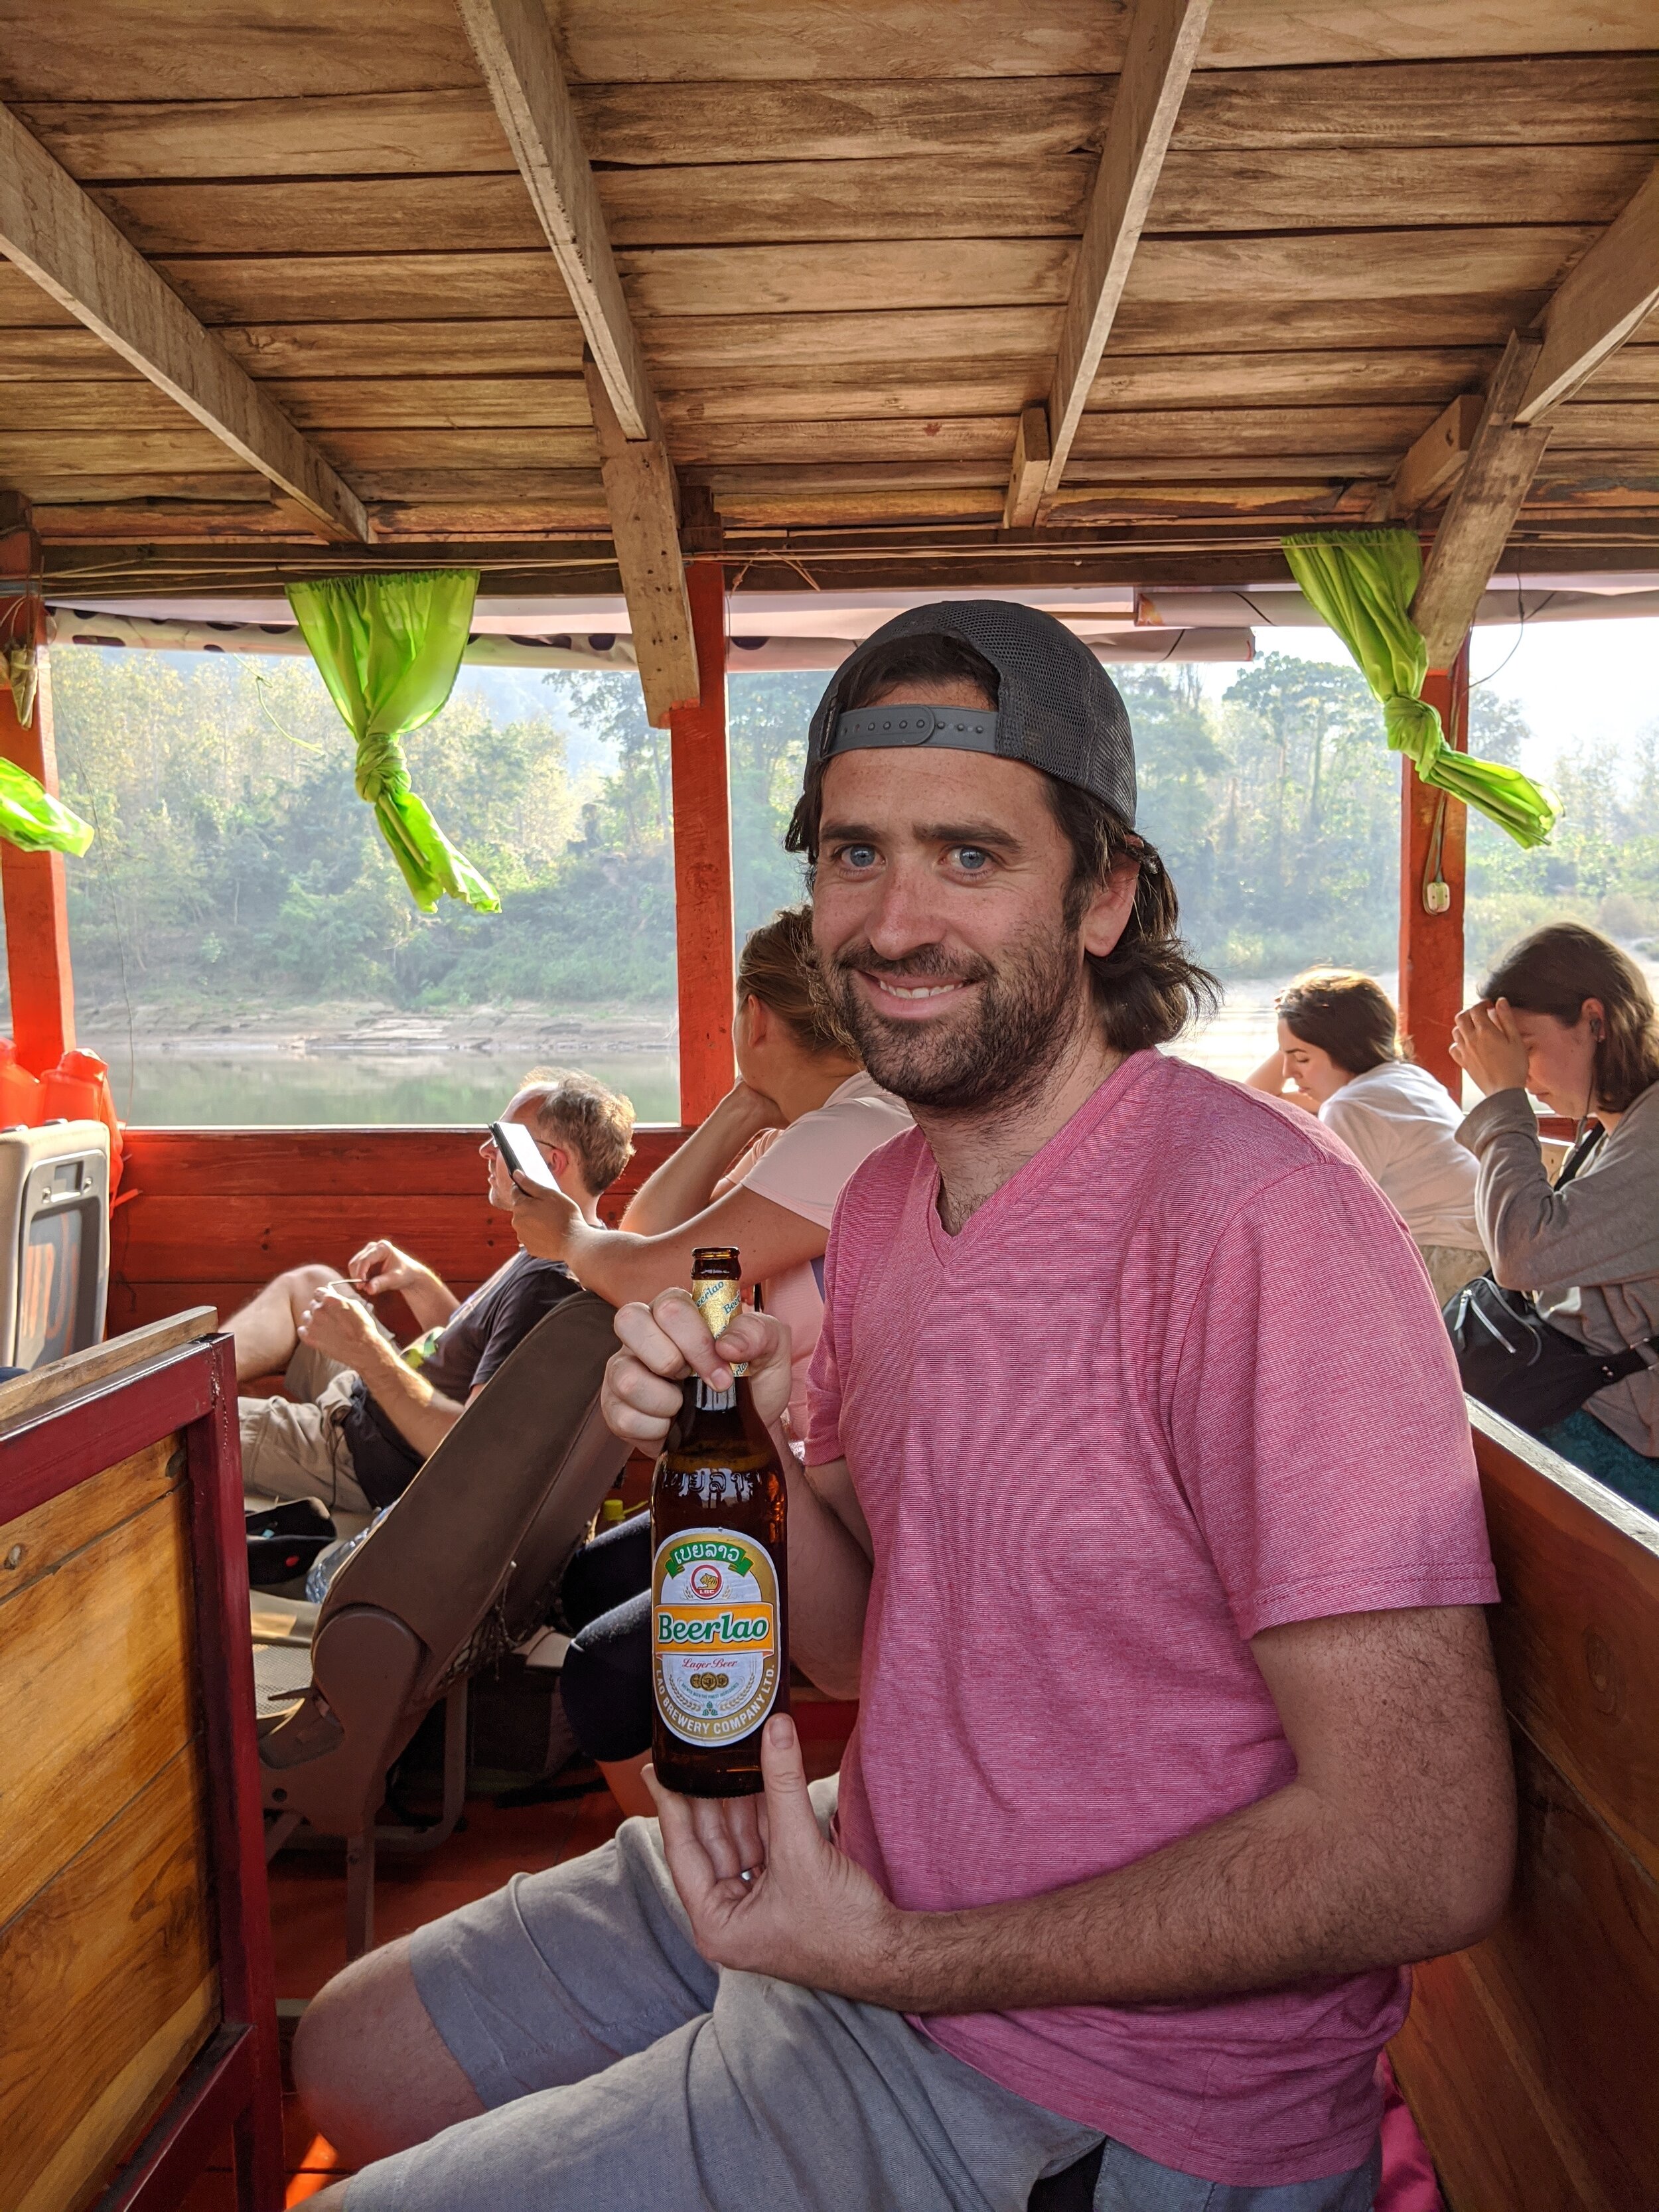 Thanks Lane! We had a two day slow boat ride from Thailand to Luang Prabang, Laos. Needless to say a few beers were needed to make it through. 